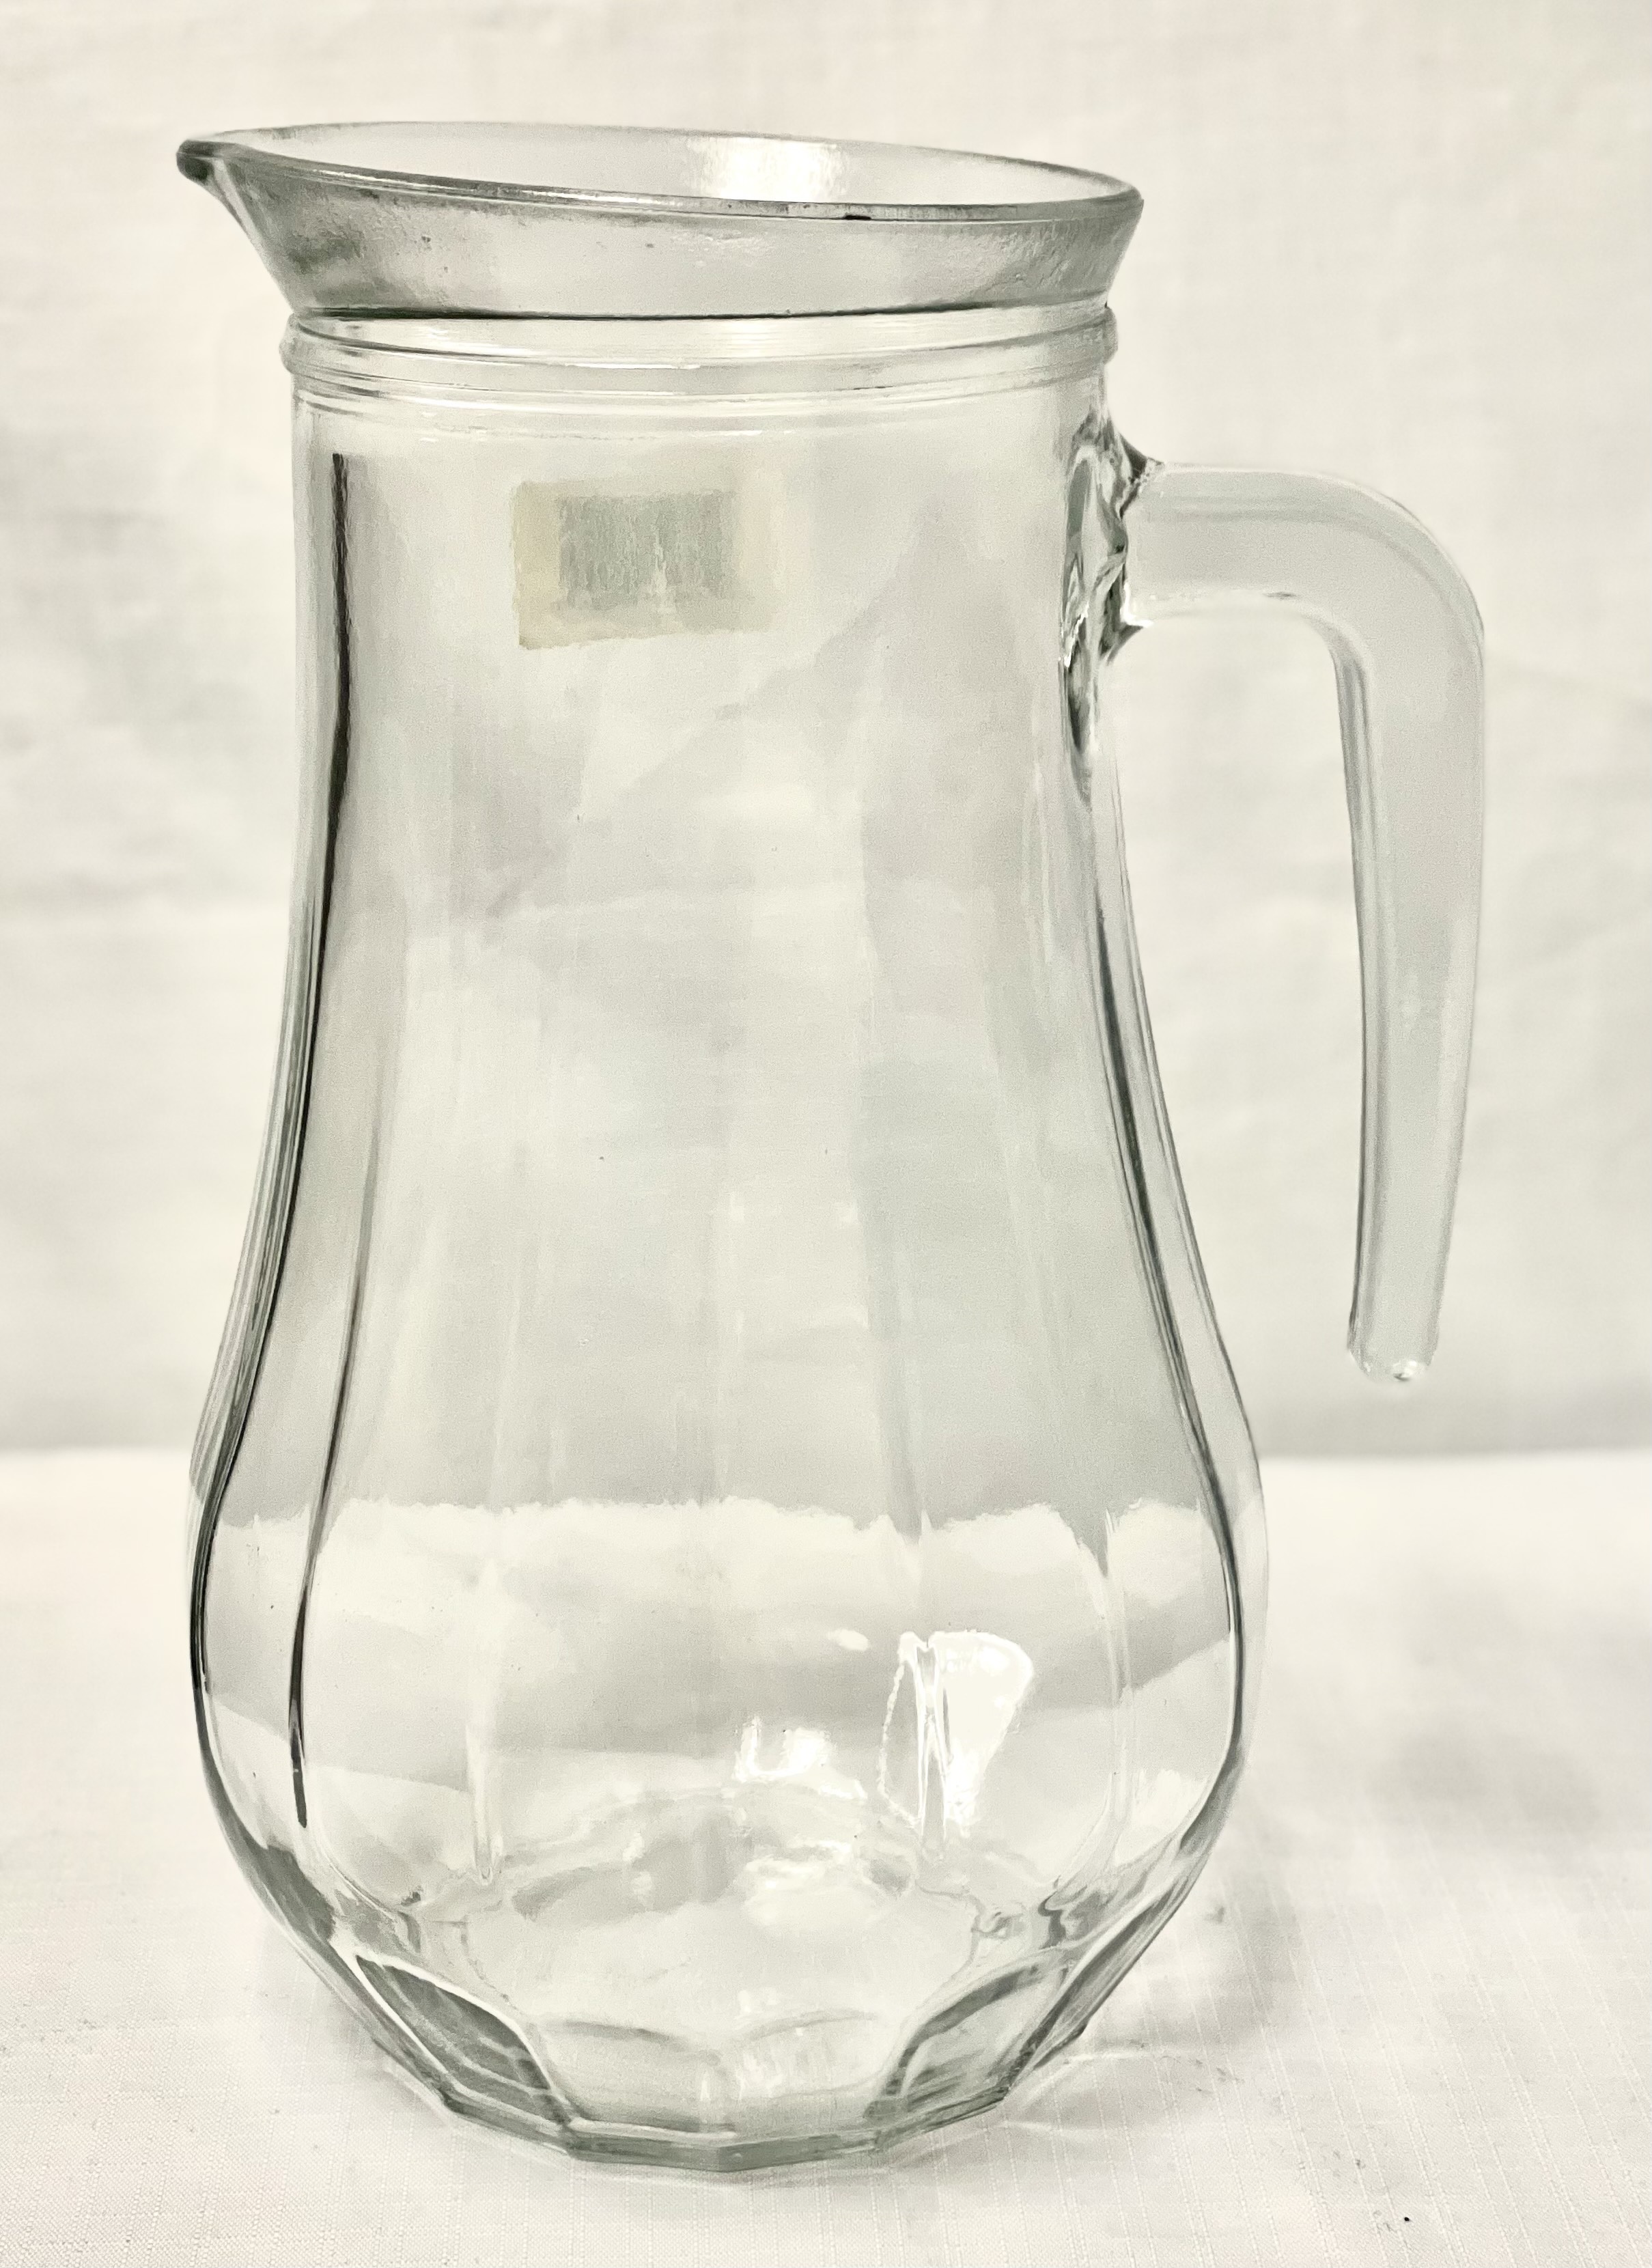 DELUXE GLASS WATER PITCHER 54 OZ